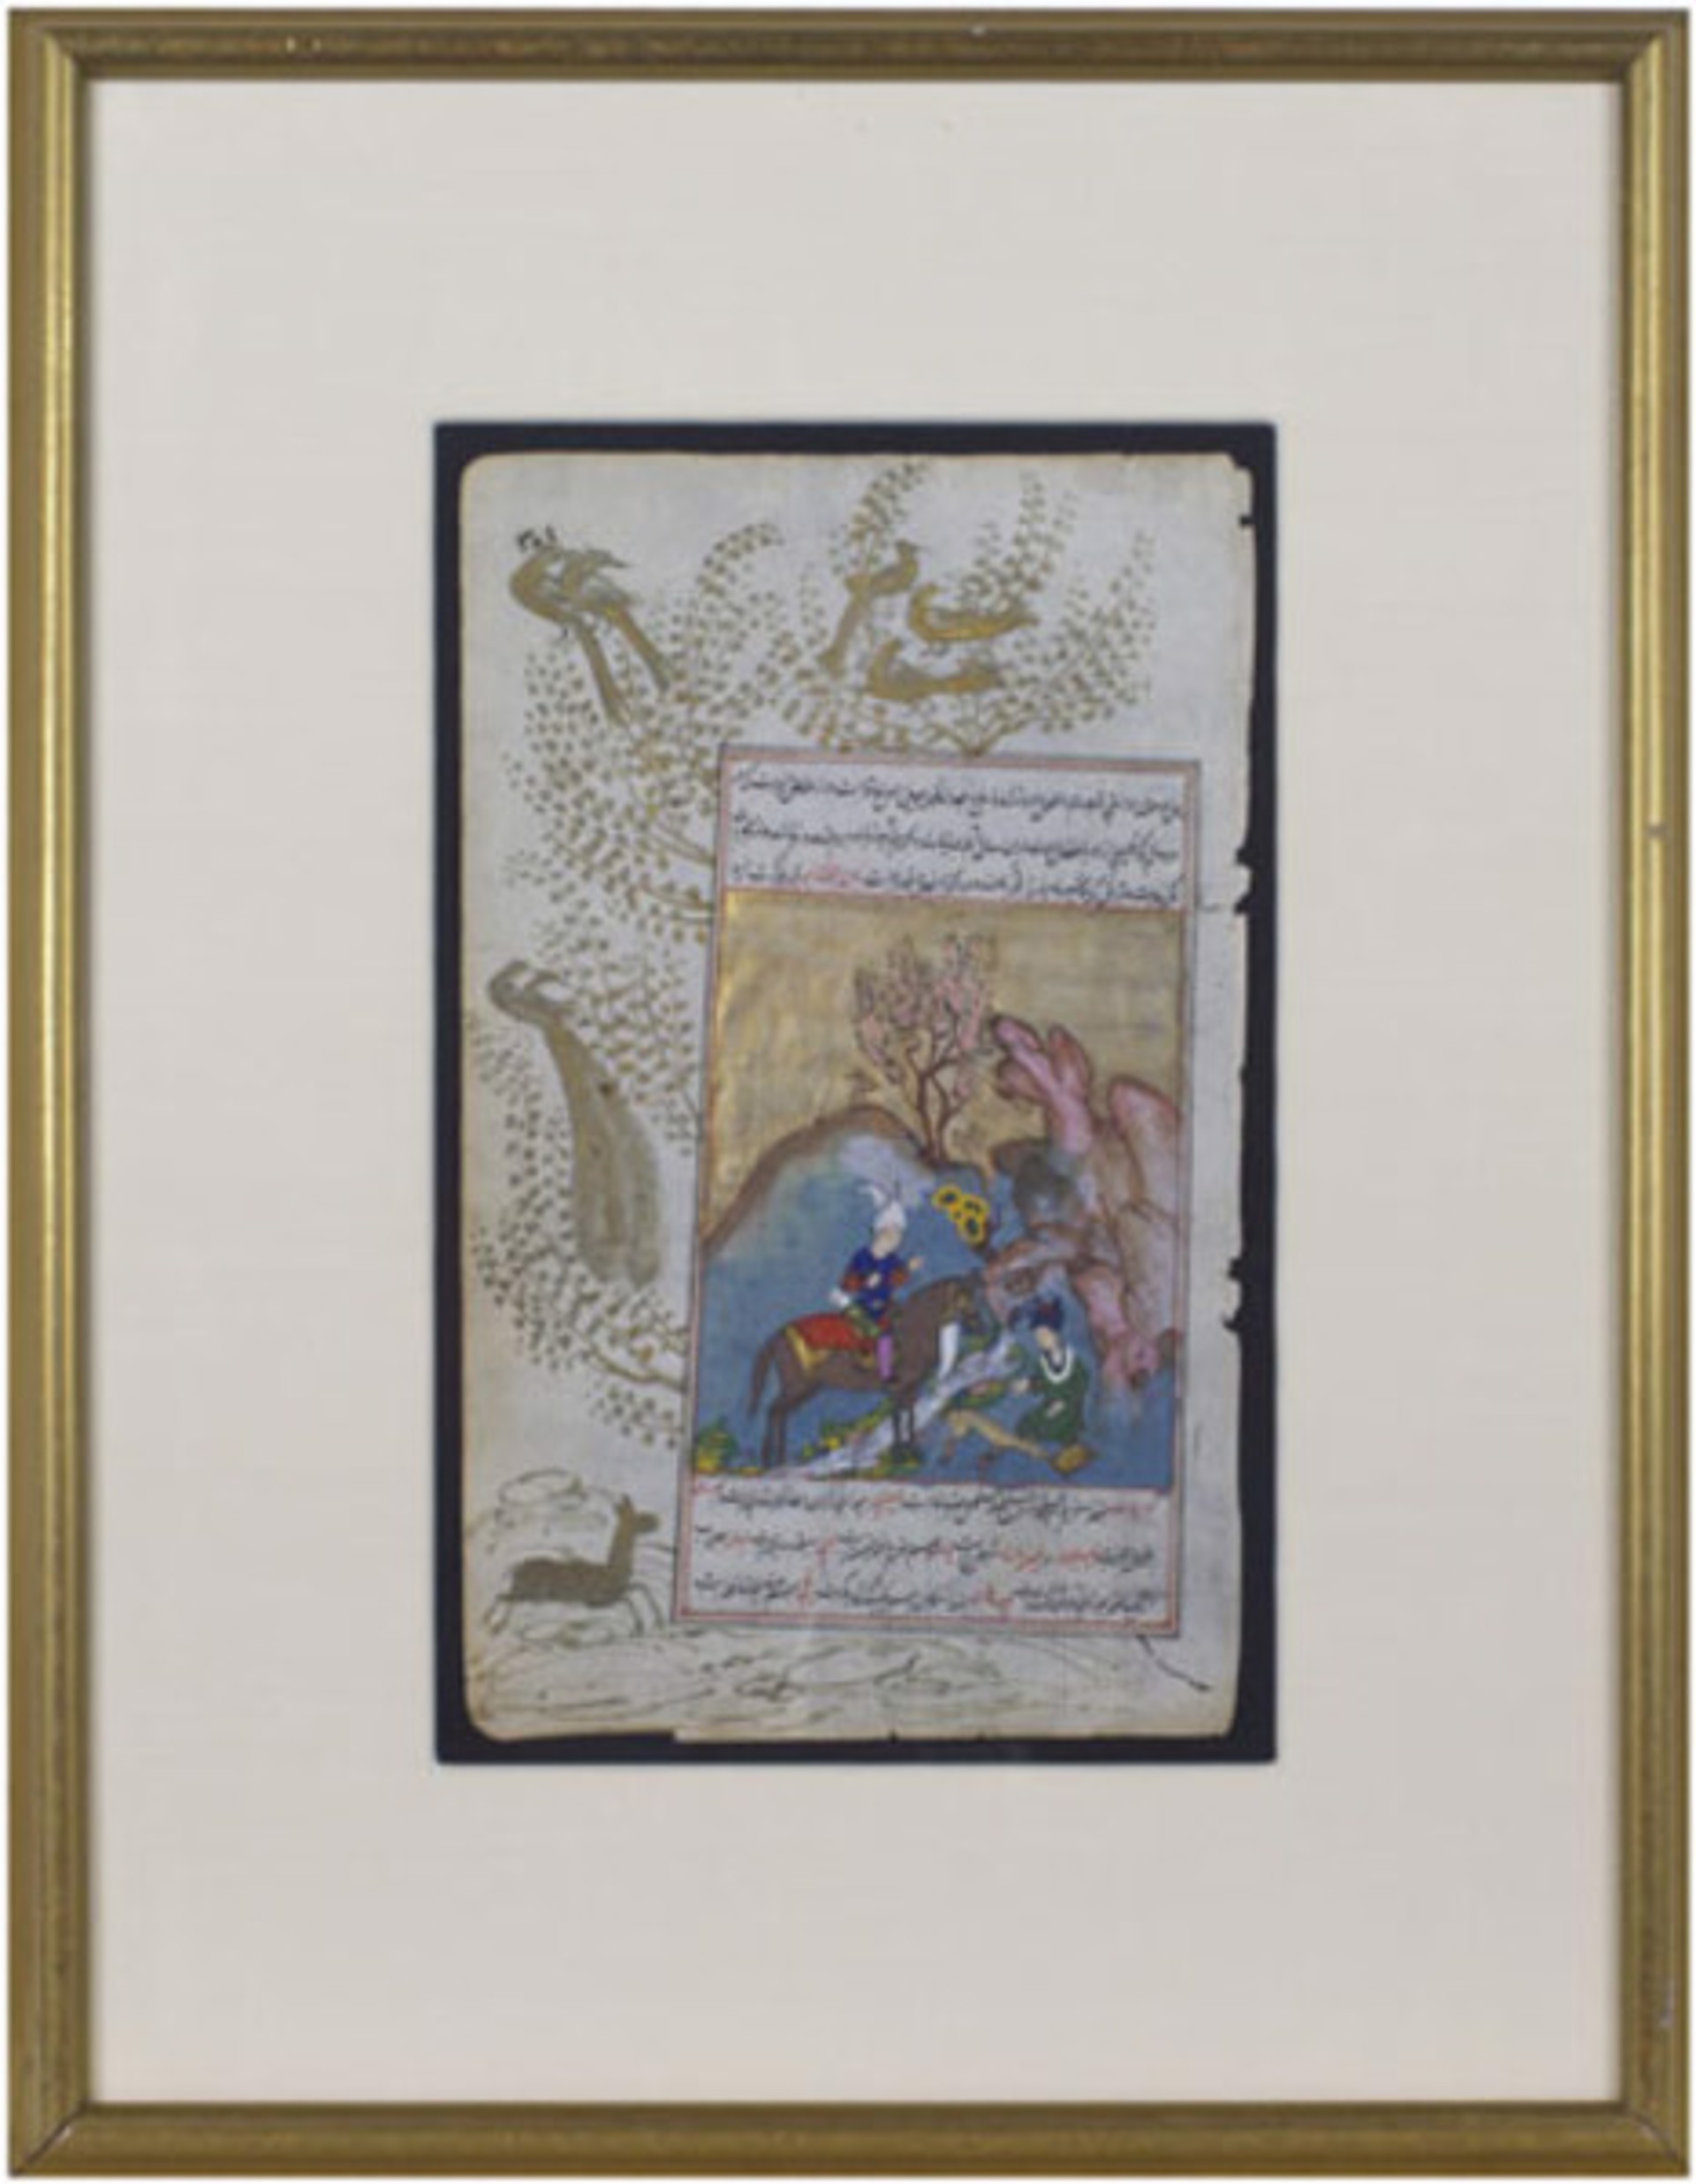 Illuminated Miniature with Two Figures Hunting in a Landscape by Persian